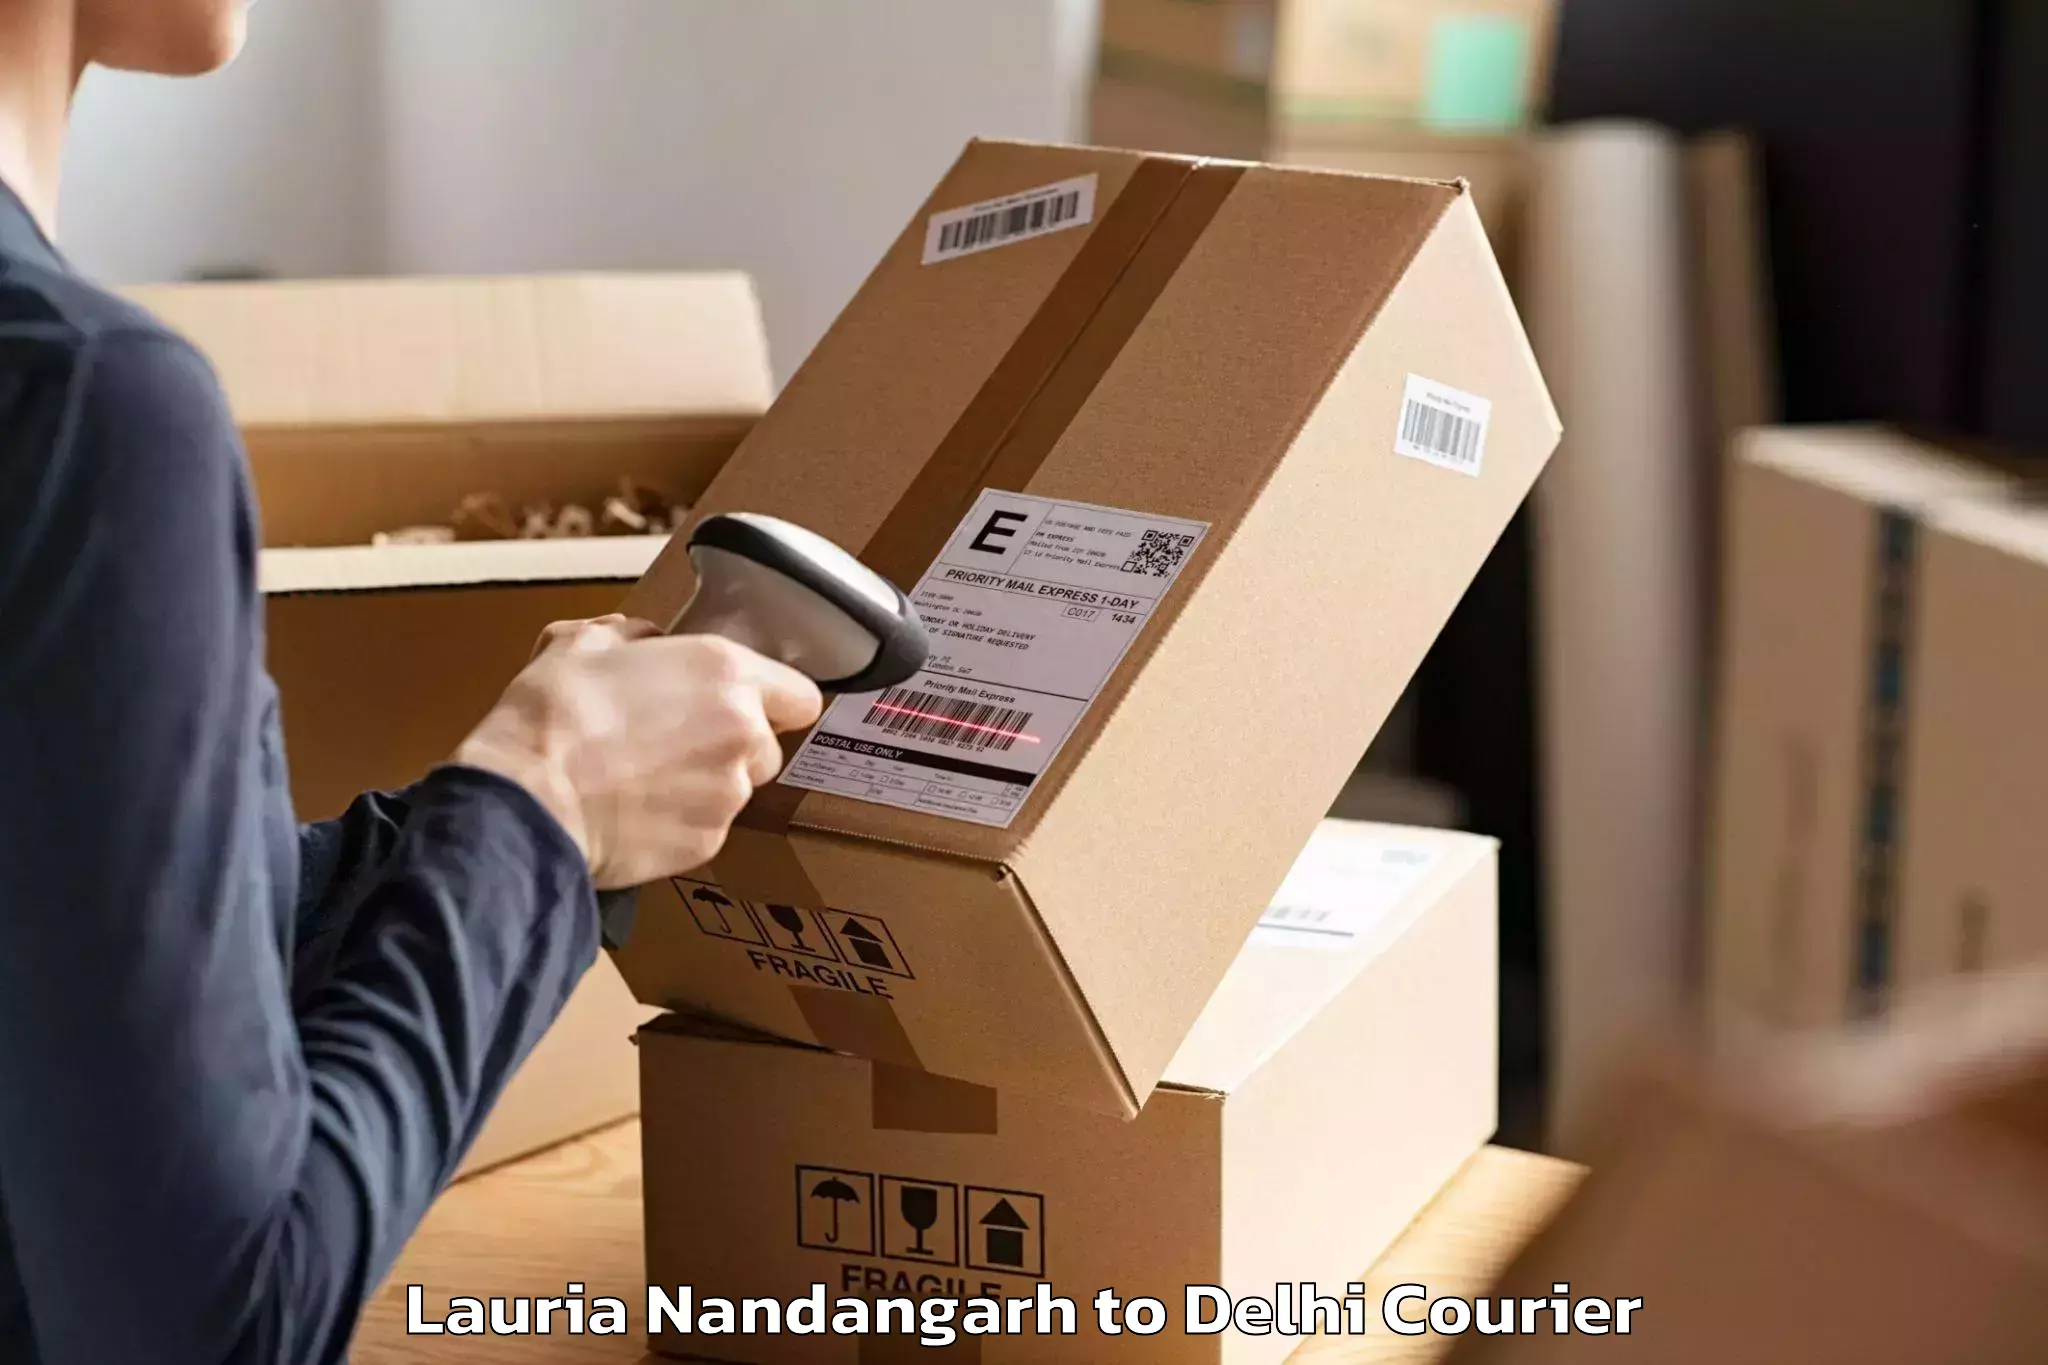 Cost-effective moving options Lauria Nandangarh to Delhi Technological University DTU